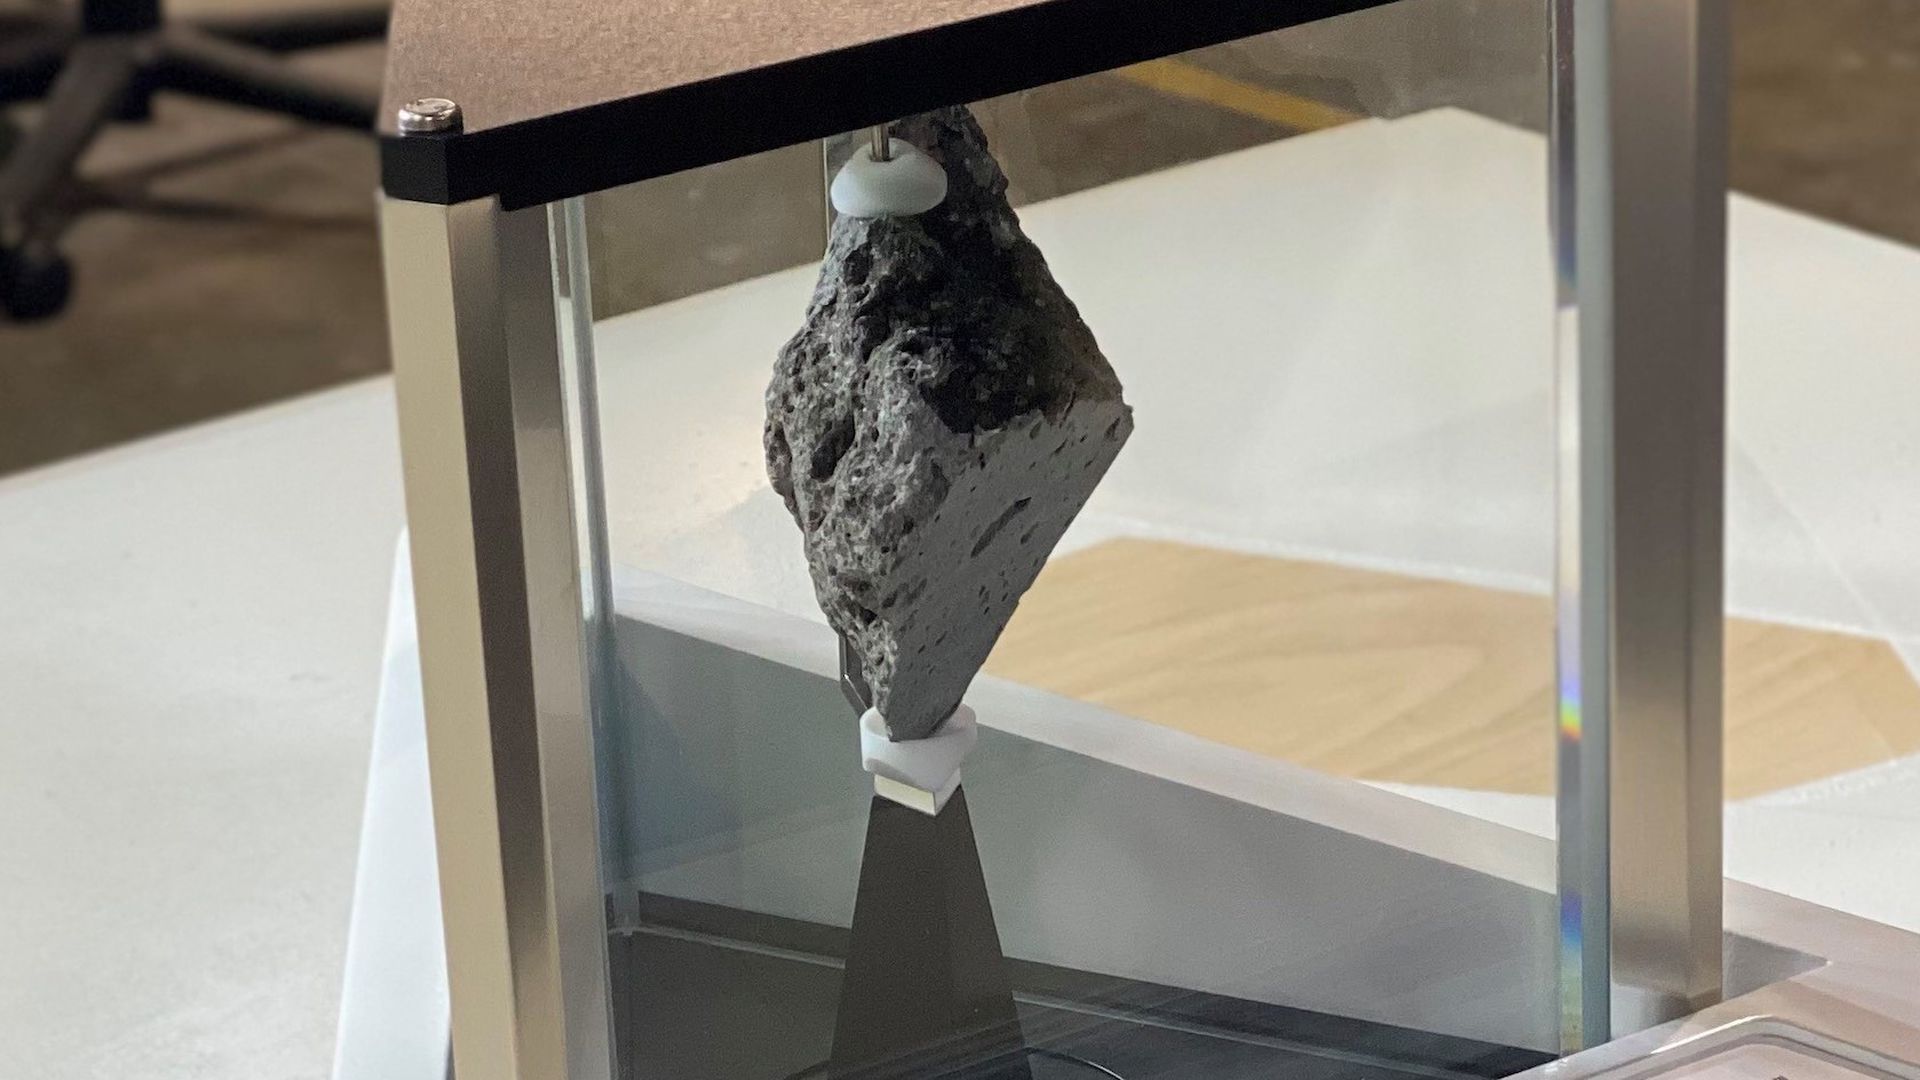 Moon rock displayed in a glass container.